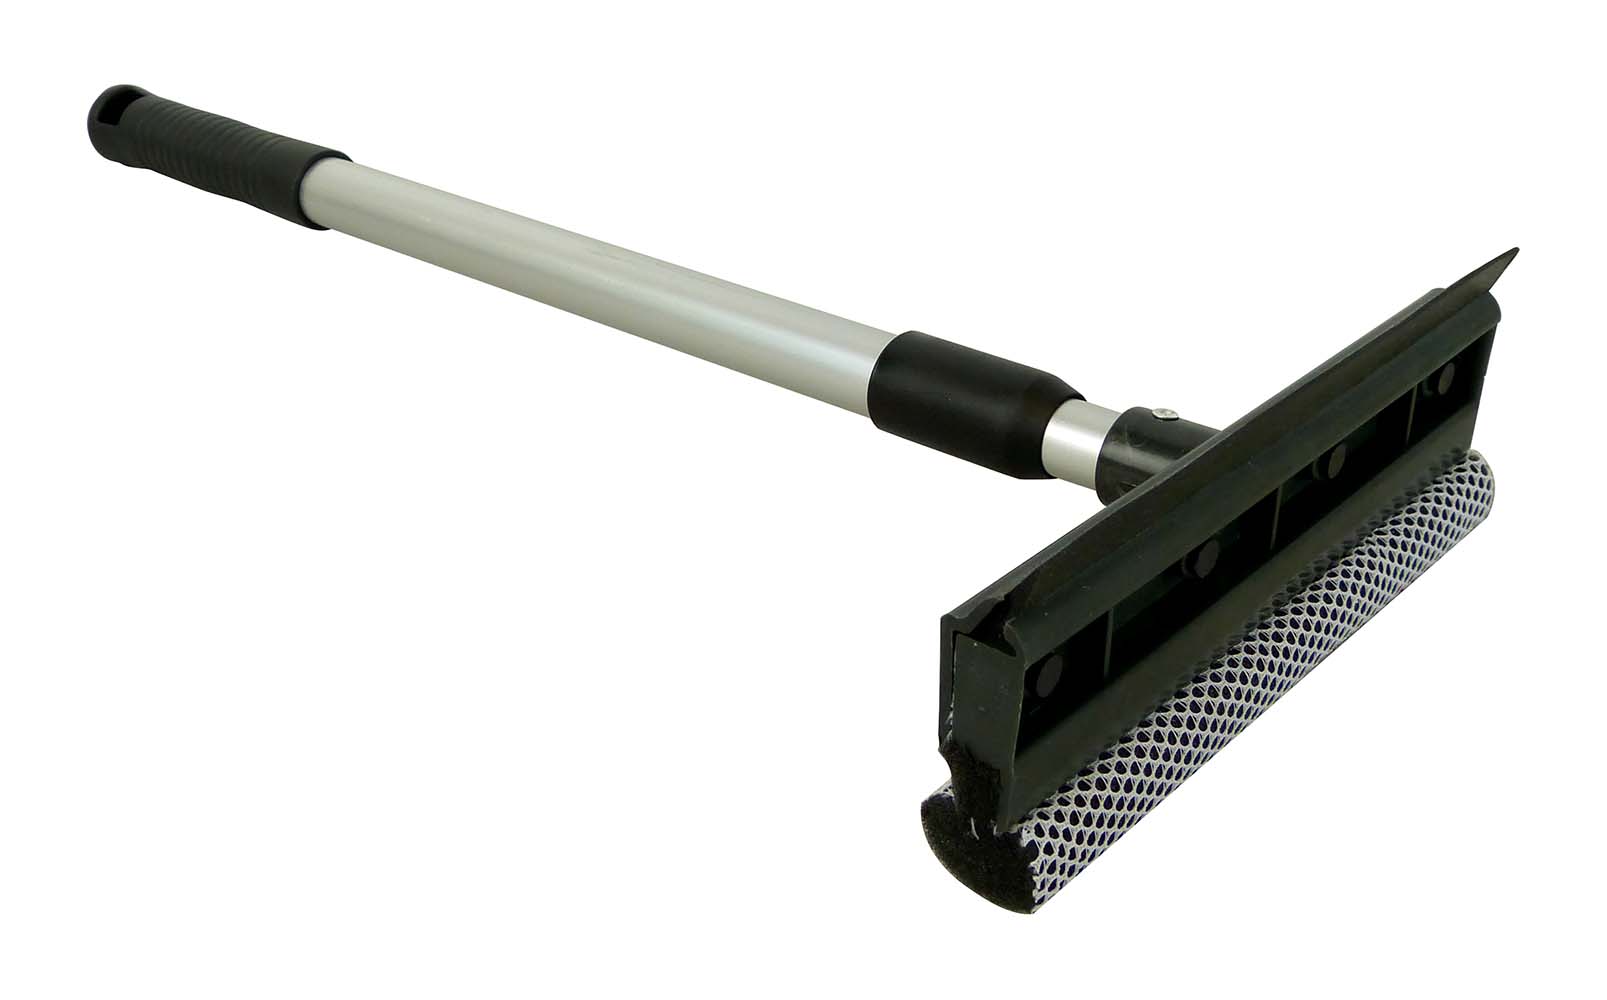 5150507 A squeegee with a telescopic handle. This squeegee has an insect sponge and a rubber wiper. Both have a length of 20 cm. The handle is telescopically adjustable from 40 to 70 cm.